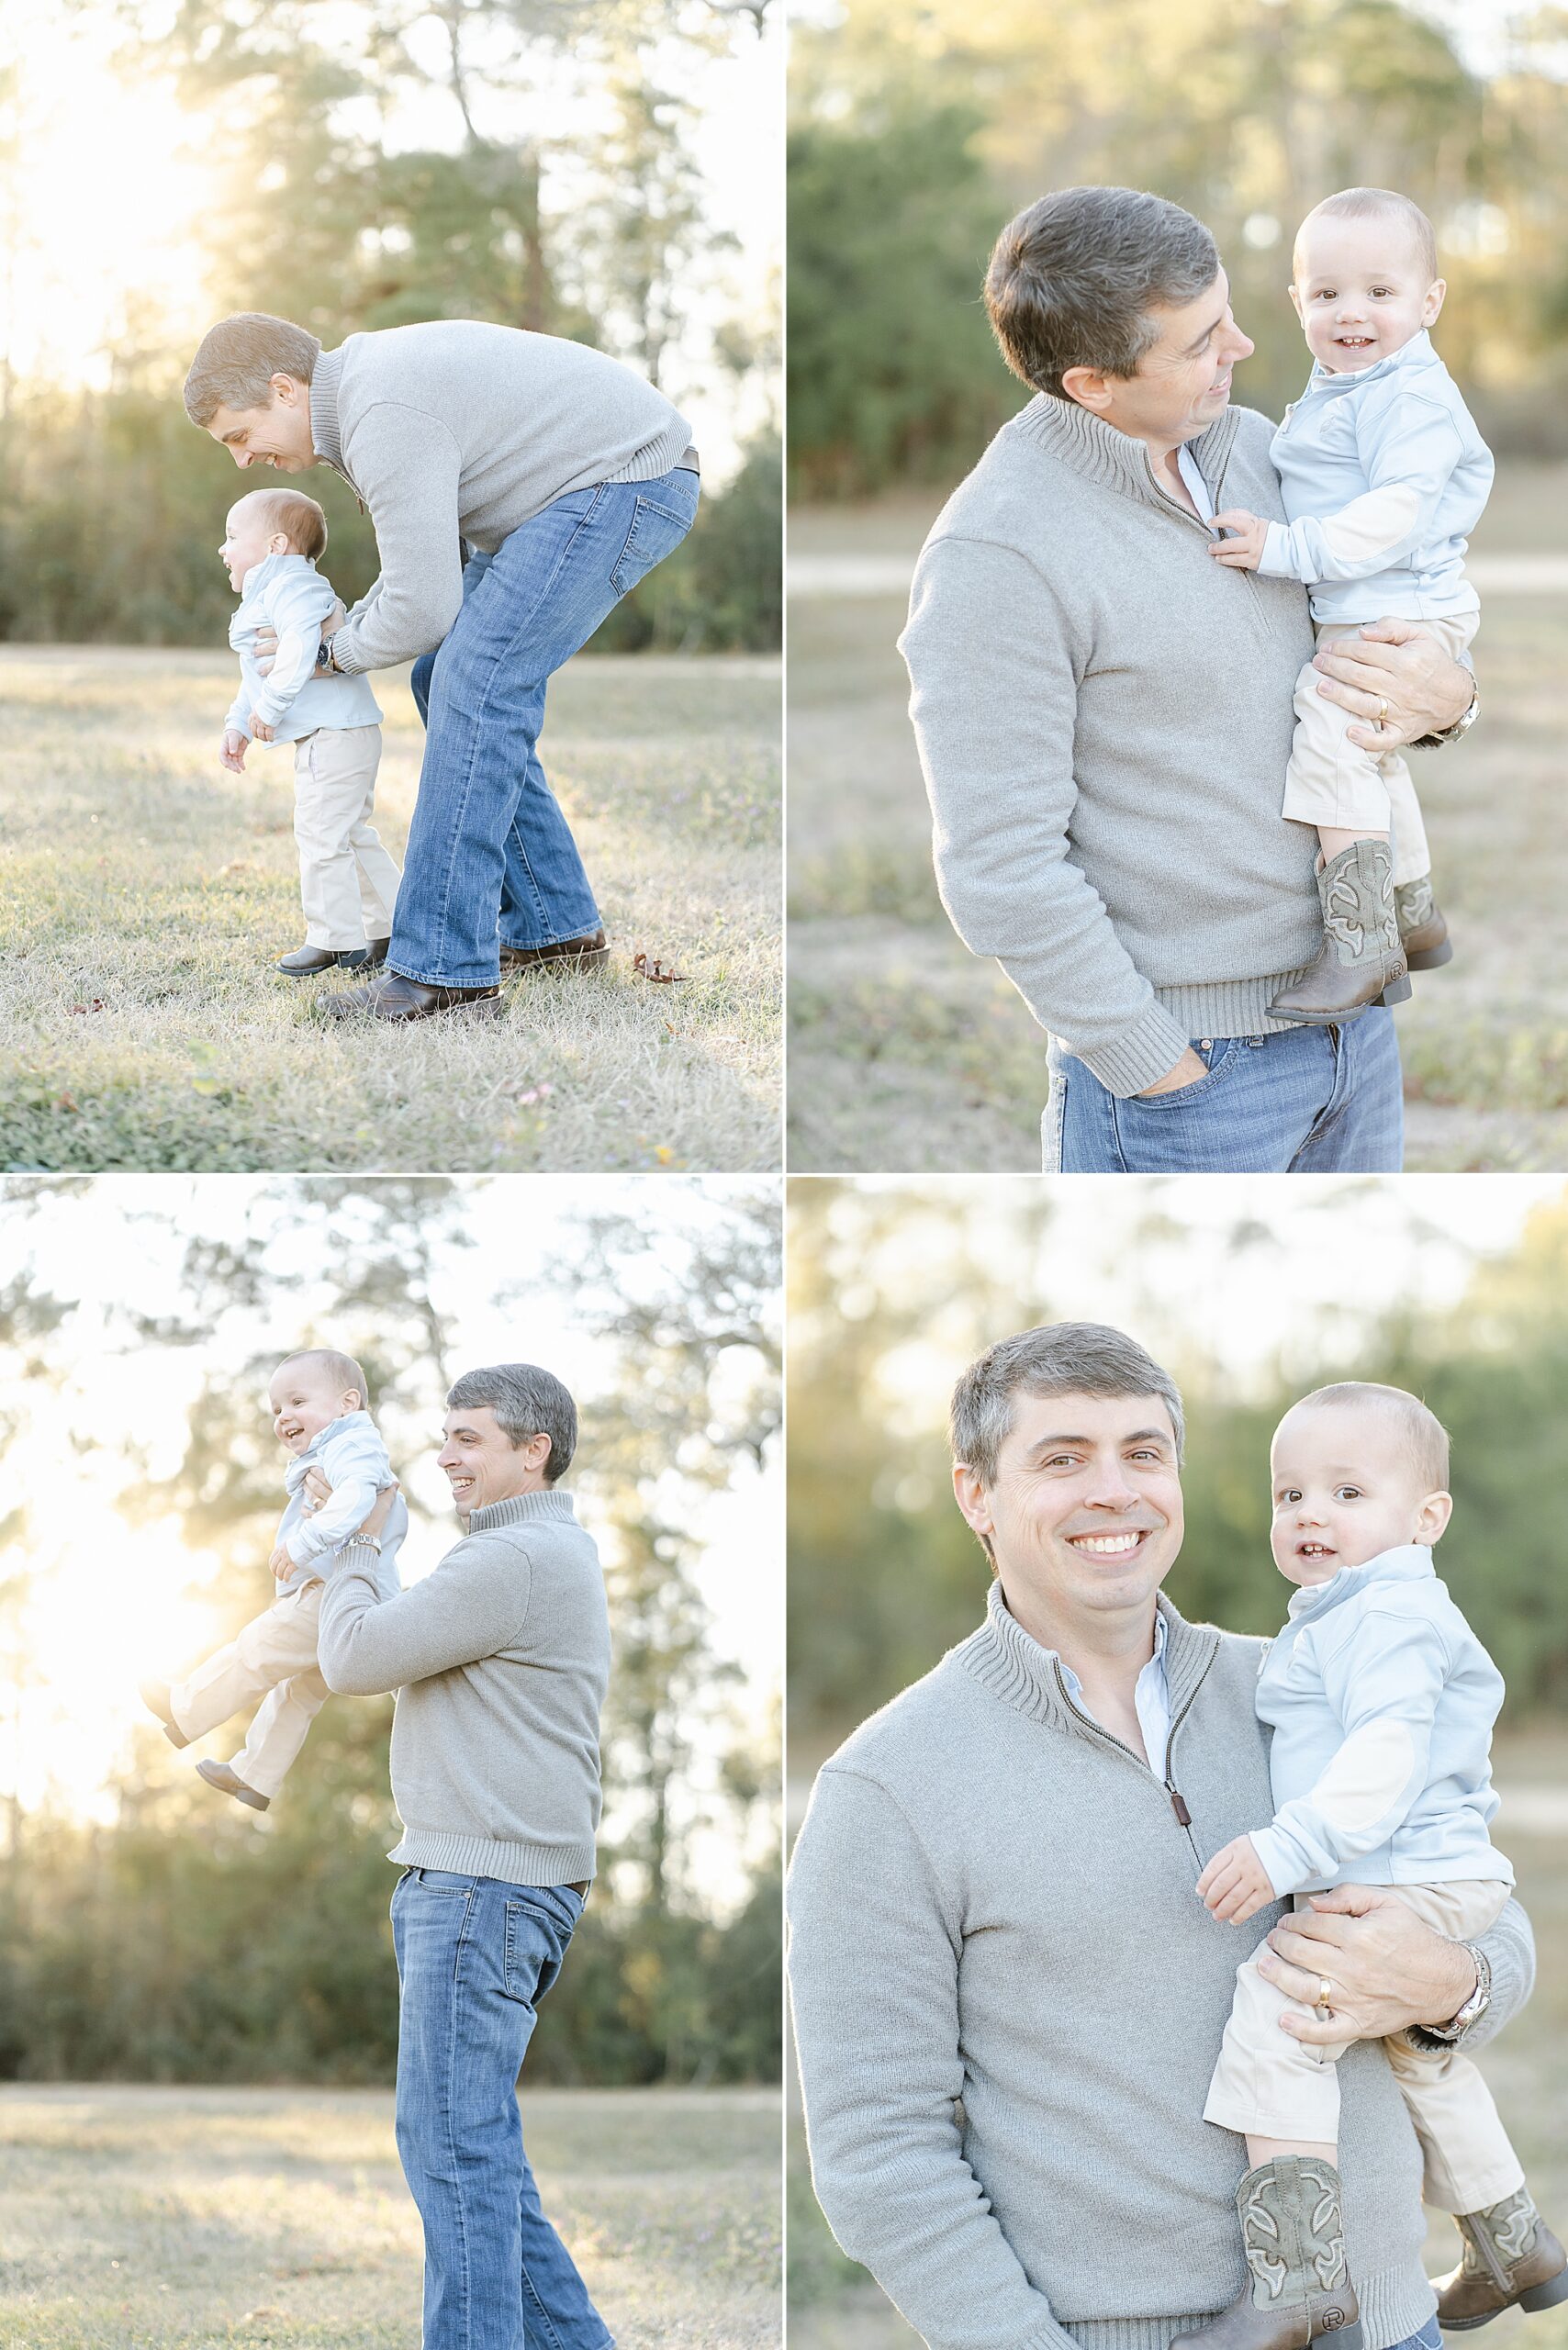 A dad and his one year old little boy laugh and play together during an outdoor family session with Emily Lofton Photography in Hattiesburg, MS.